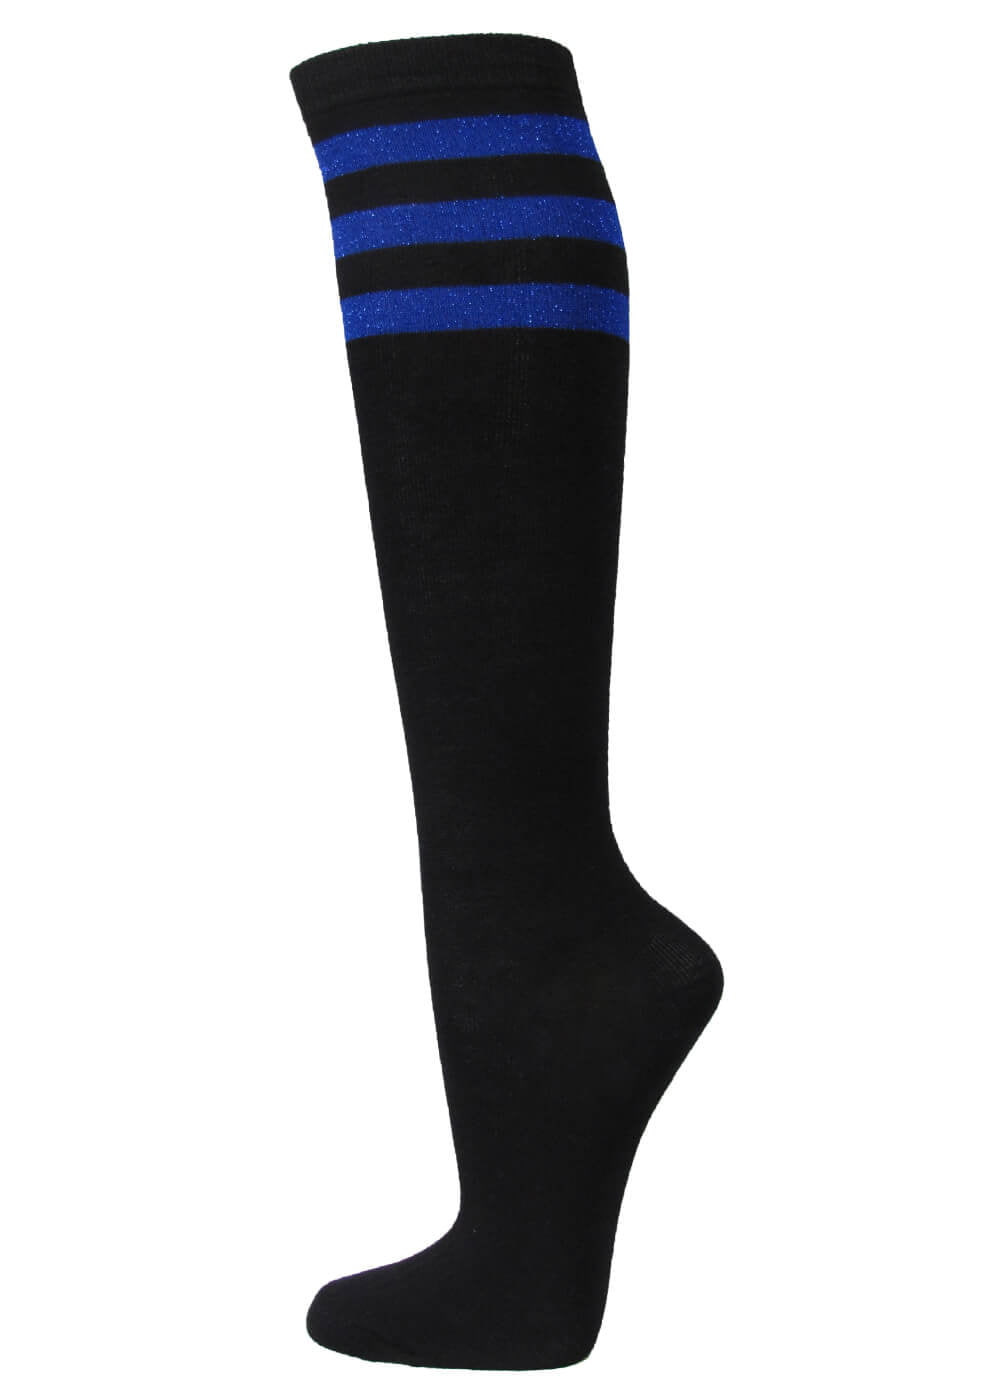 NEVSNEV Knee High Tube Socks Comfortable and Breathable with Triple Stripes for Boys, 